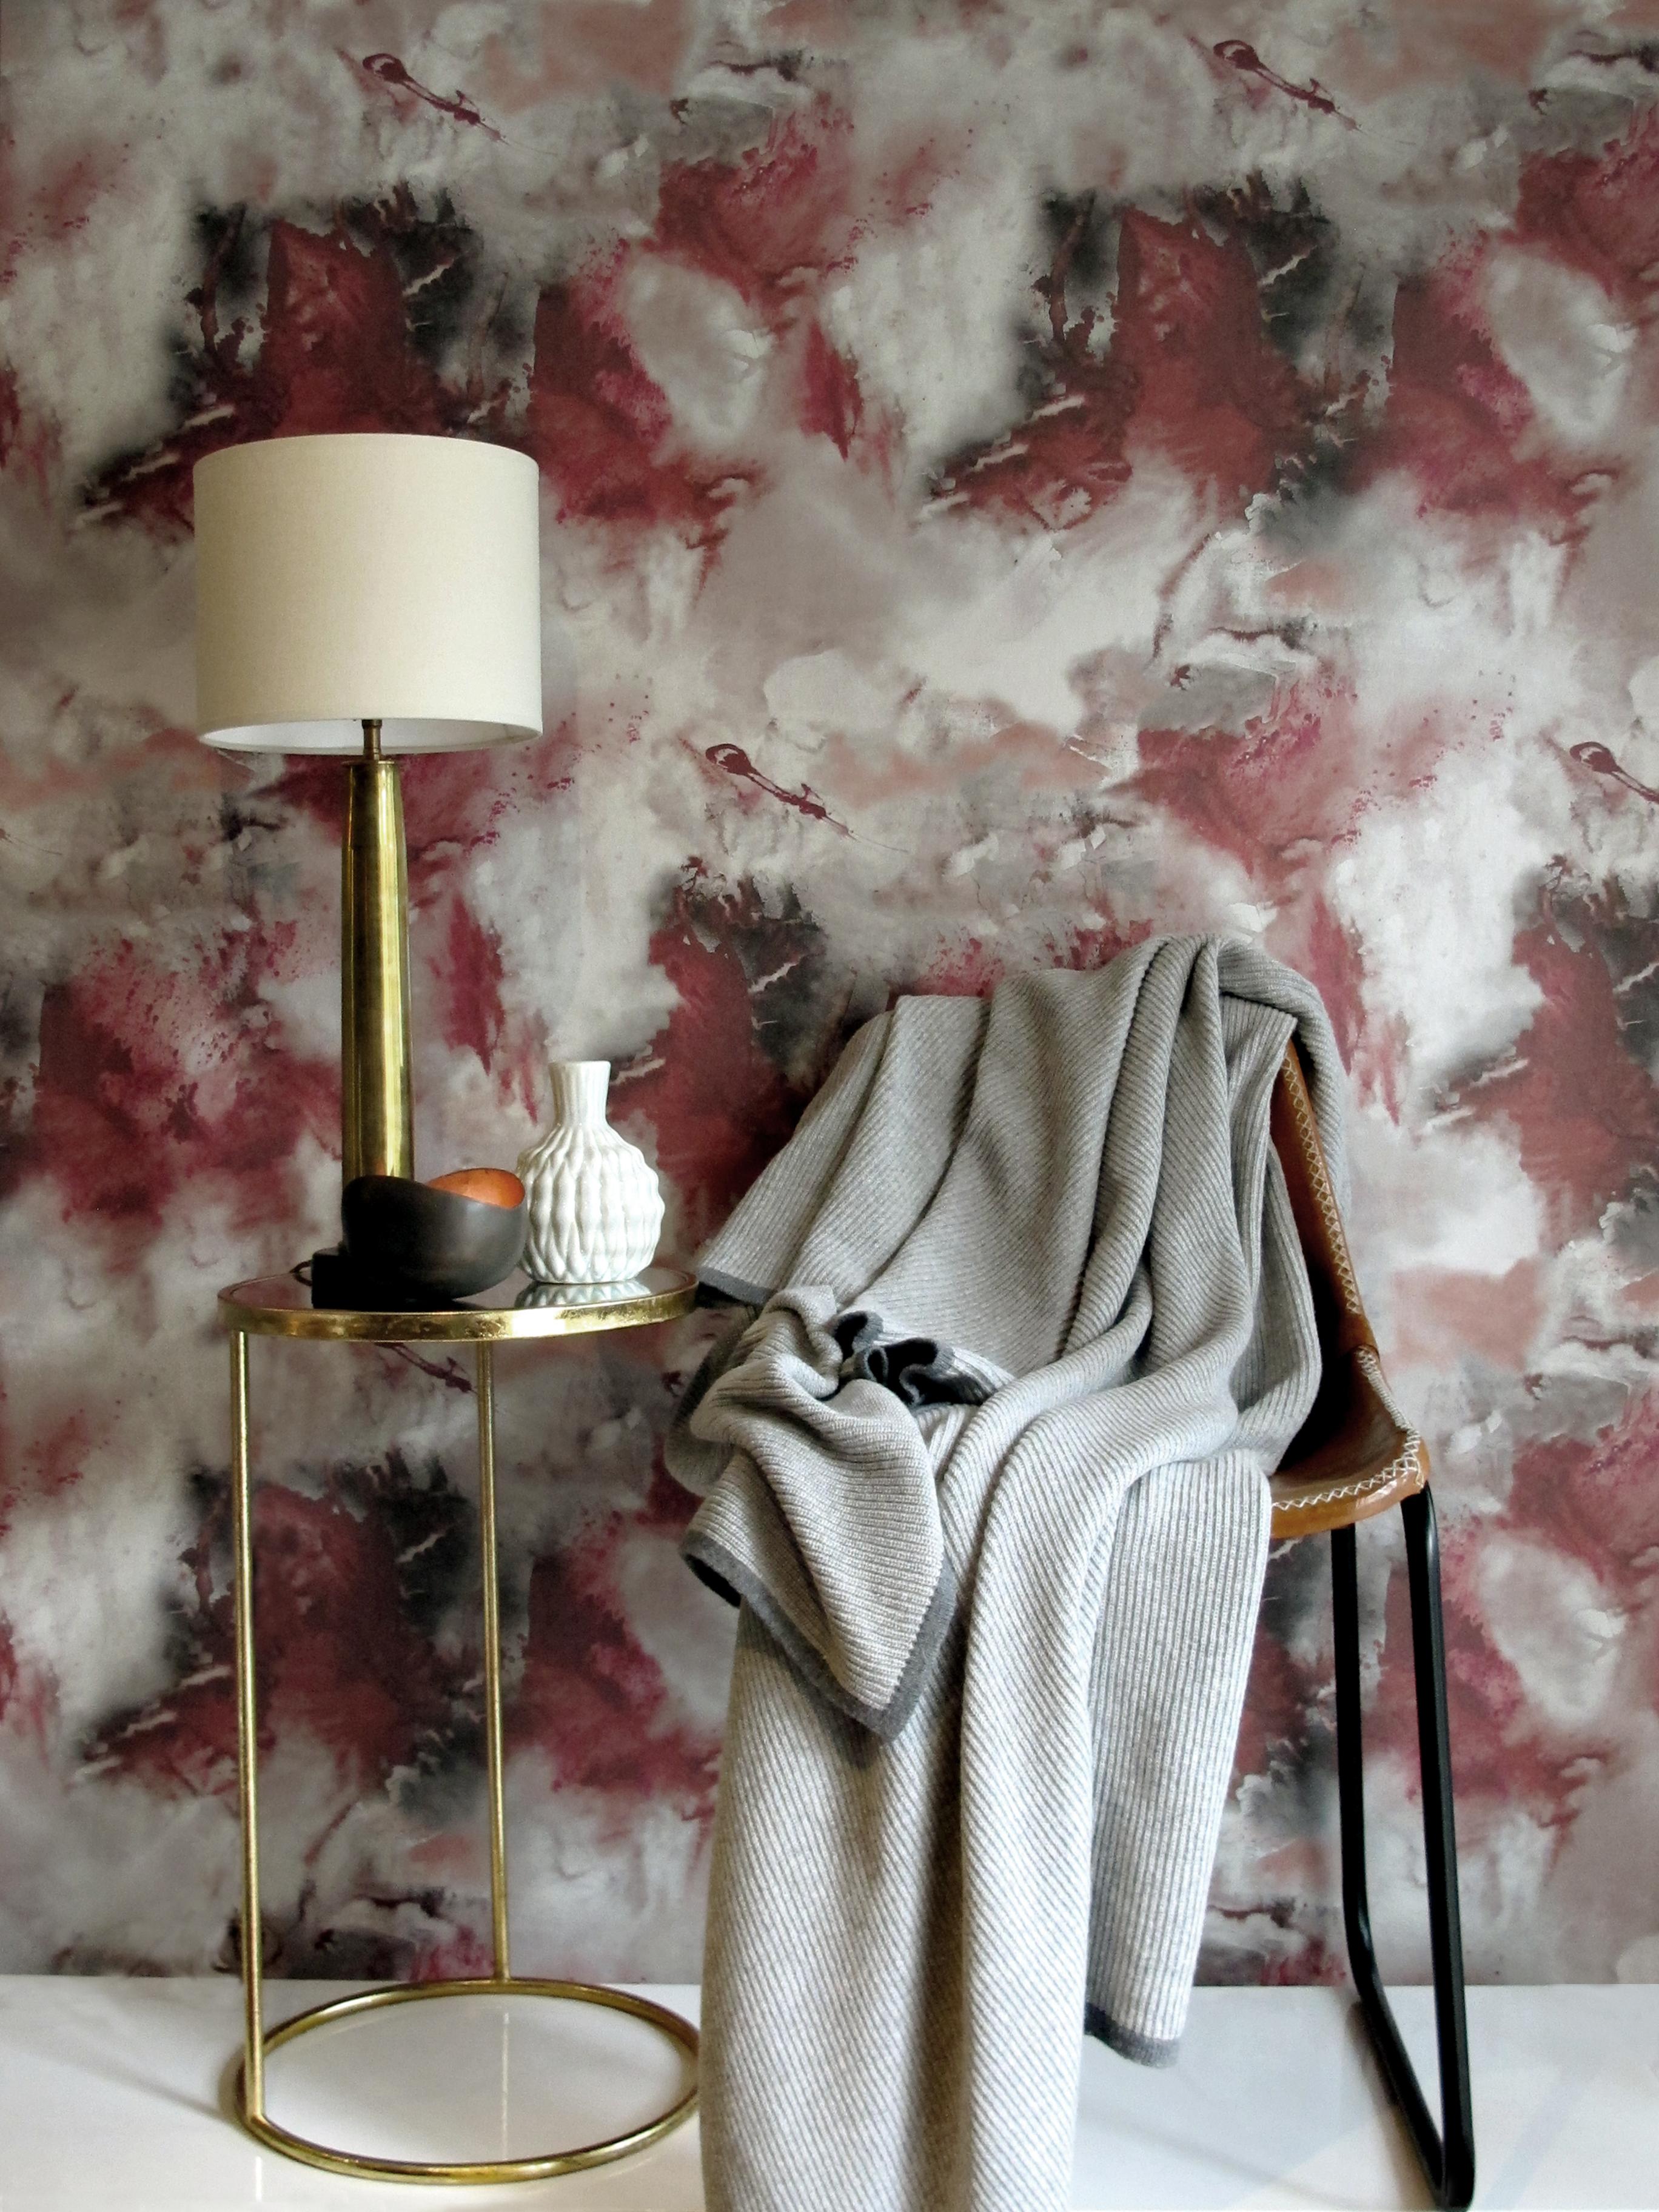 The sublime, 21st century Cloudbusting wallpaper introduces harmonious moods into your interior with a beautiful aesthetic of clouds forming over a metallic backdrop. Delivered in a swirling mist of grey, peach, blue and marsala, this alluring mica